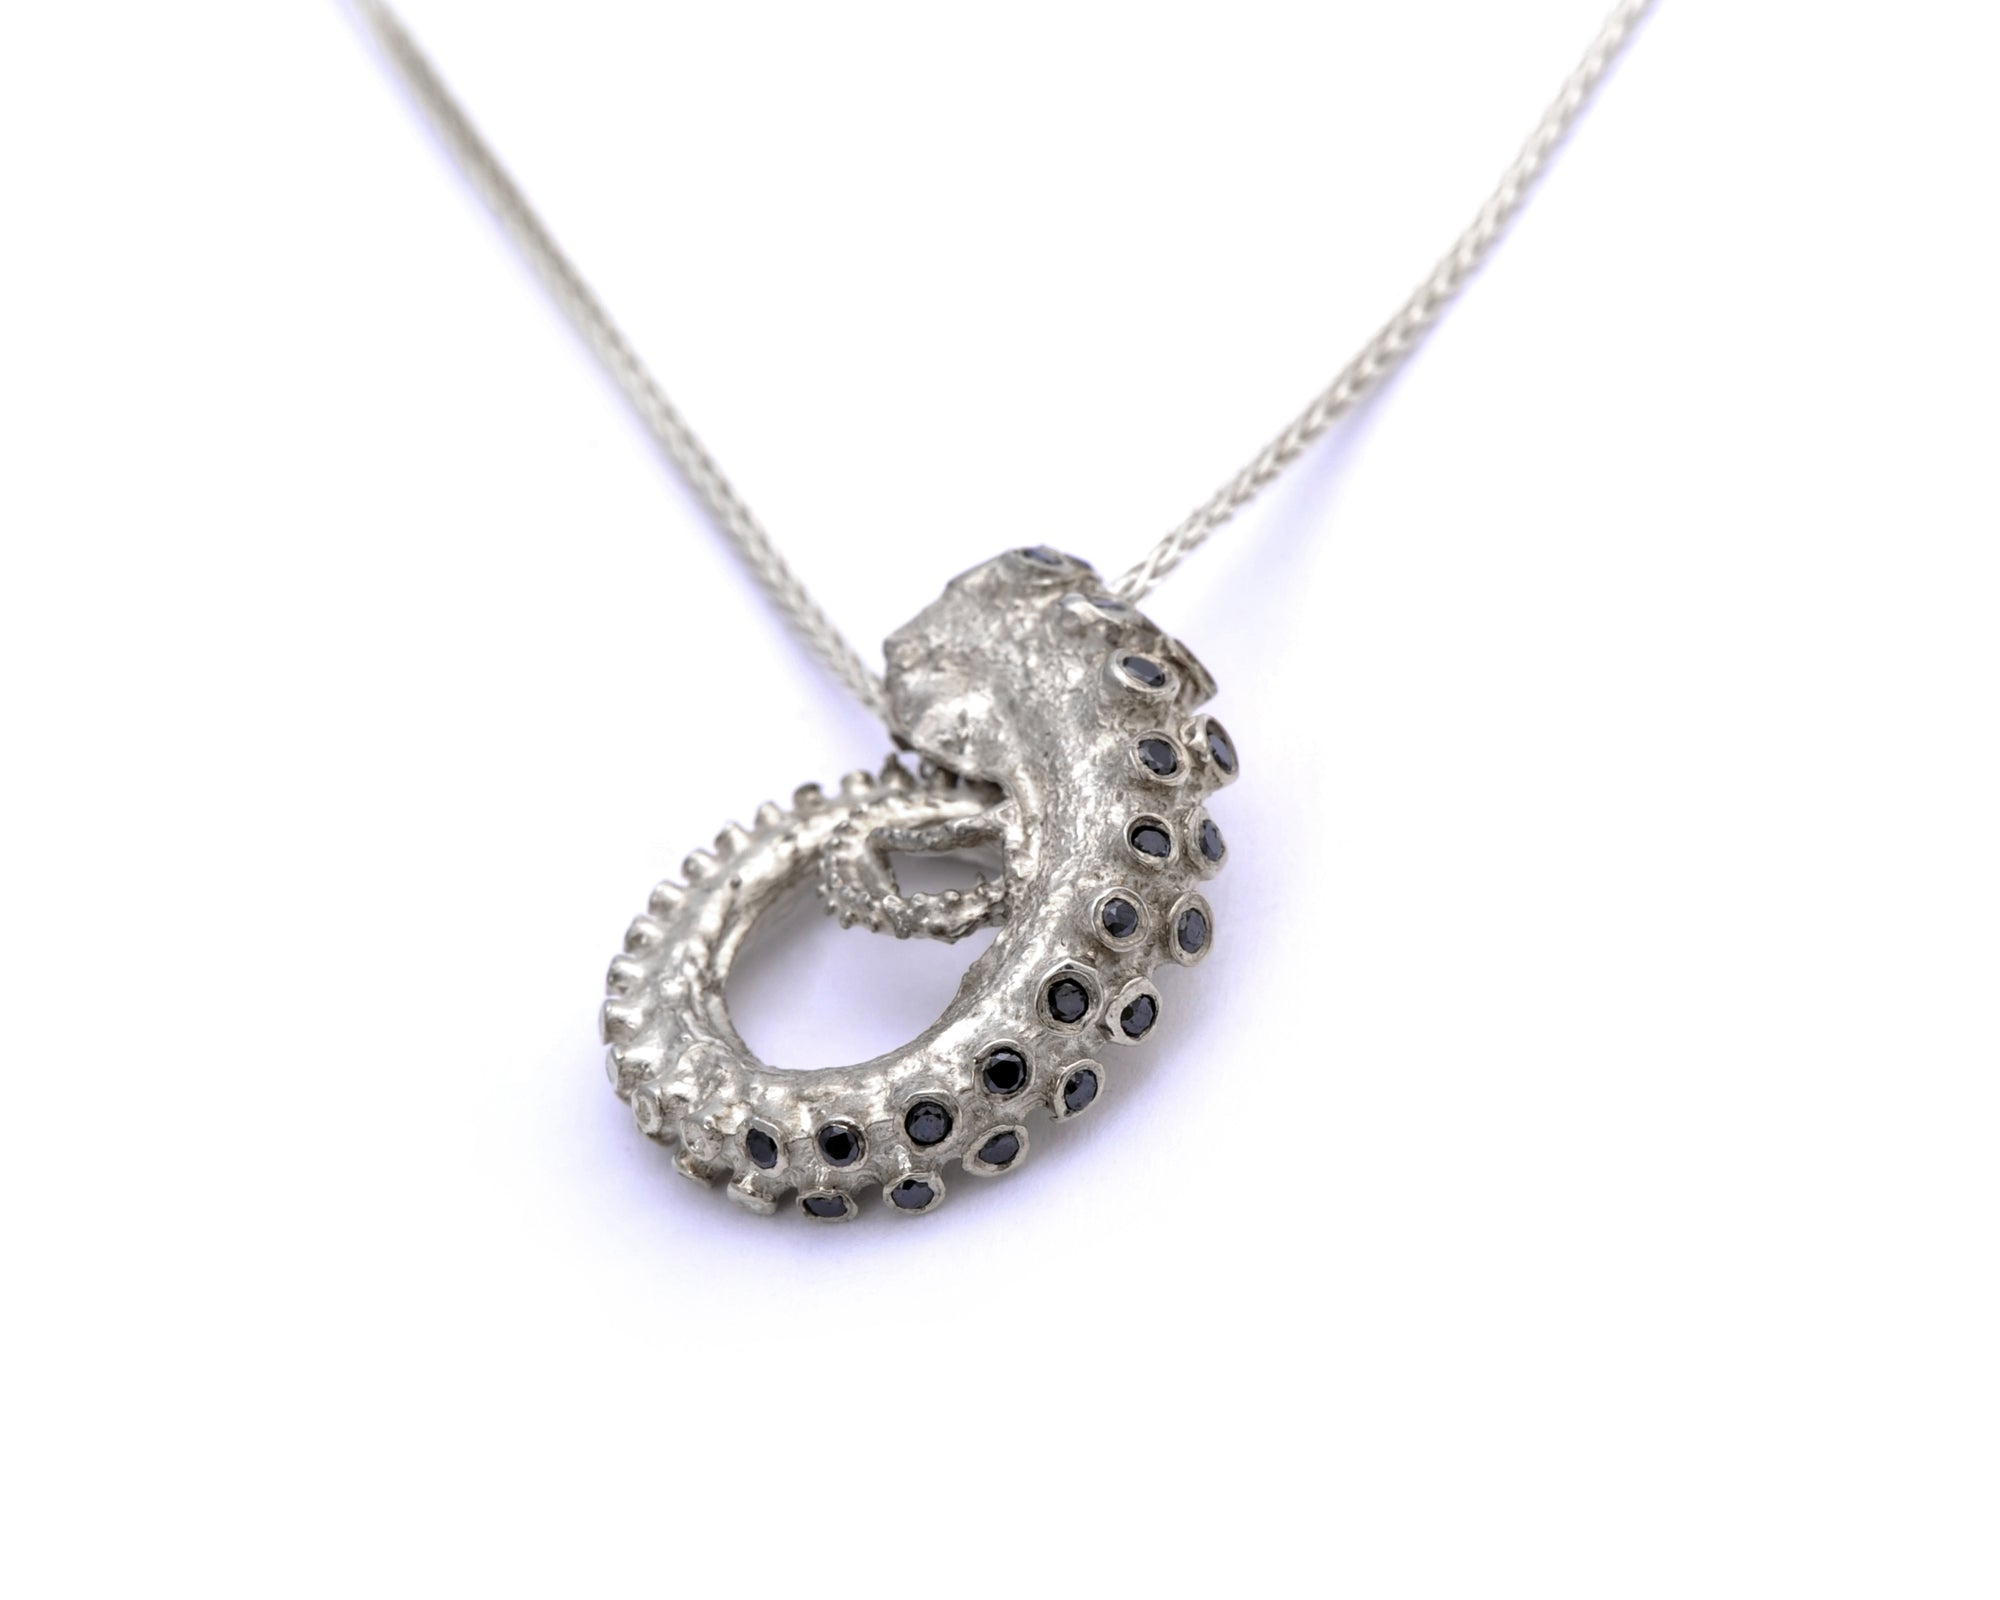 Tentacle Necklace with Black Diamonds